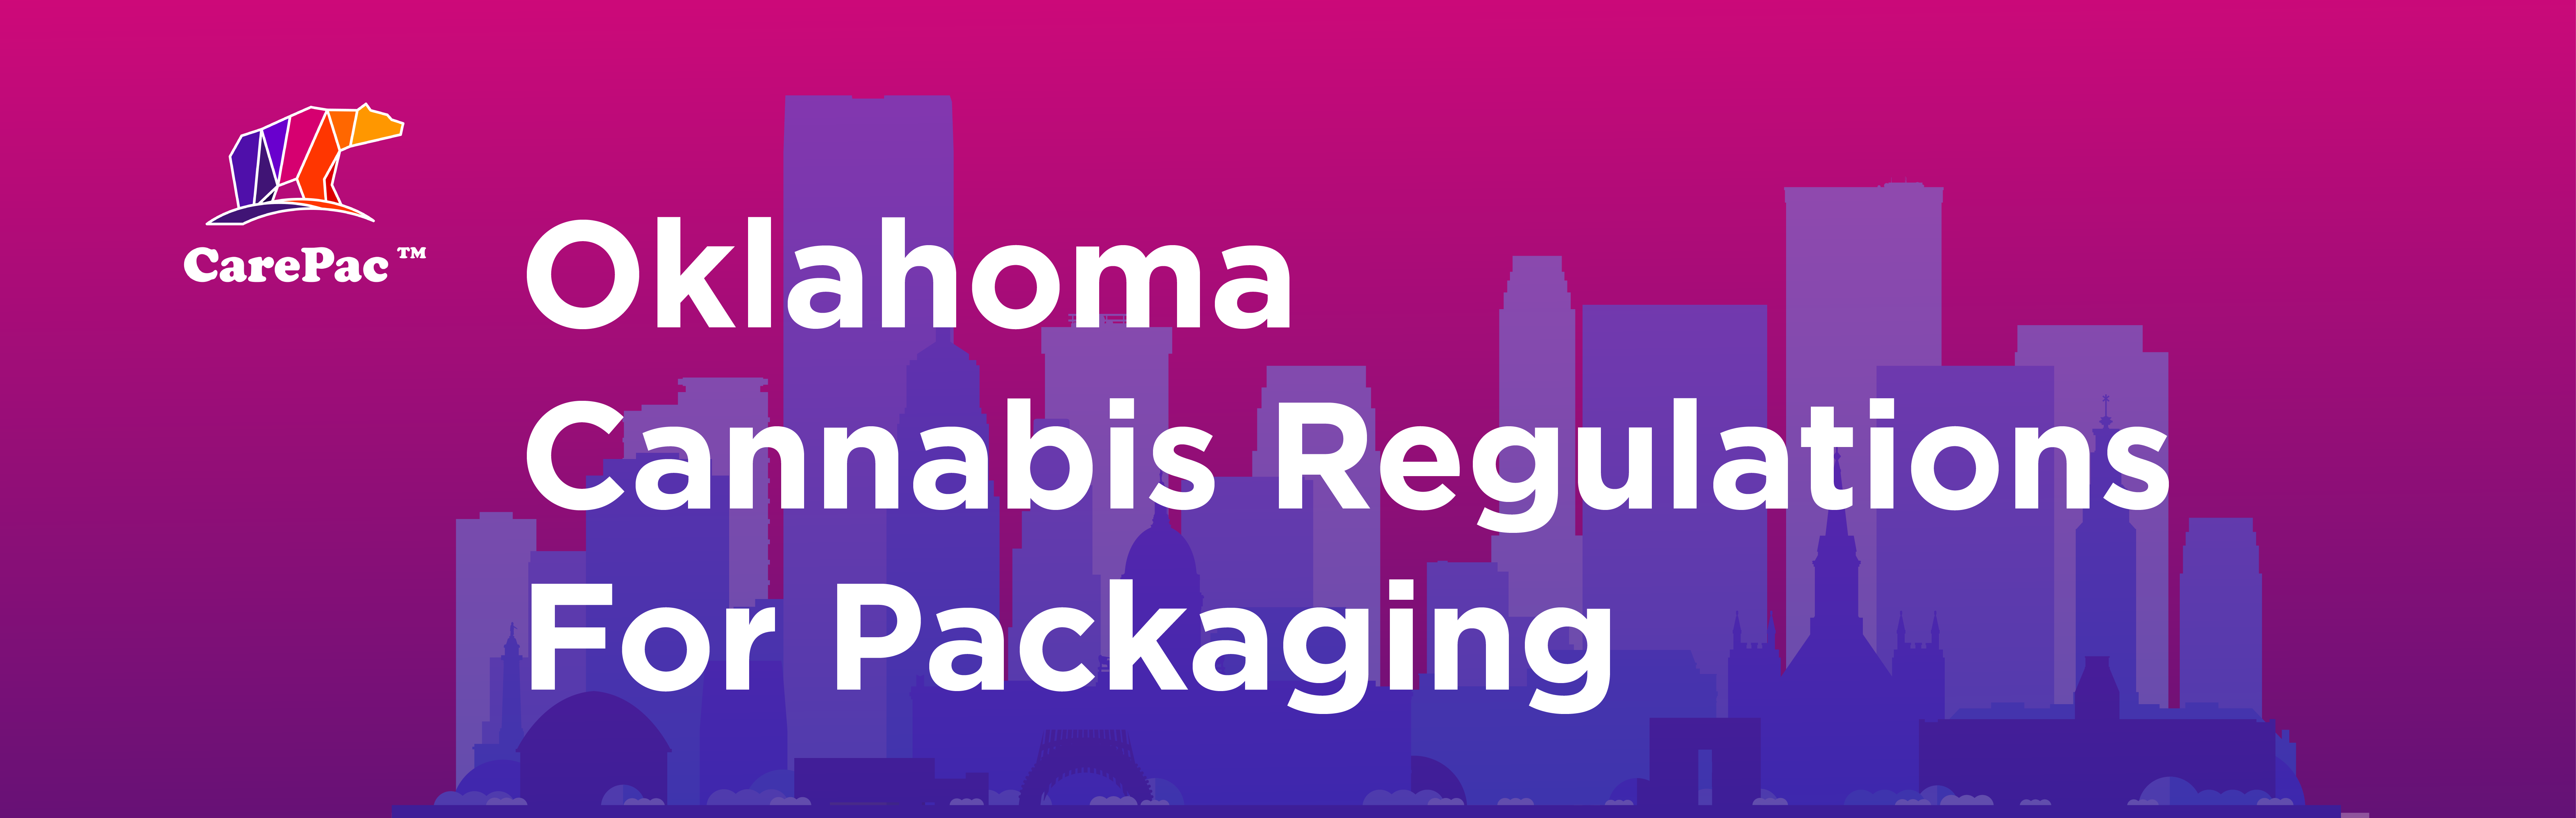 oklahoma 02 Overview of Oklahoma cannabis regulations for packaging